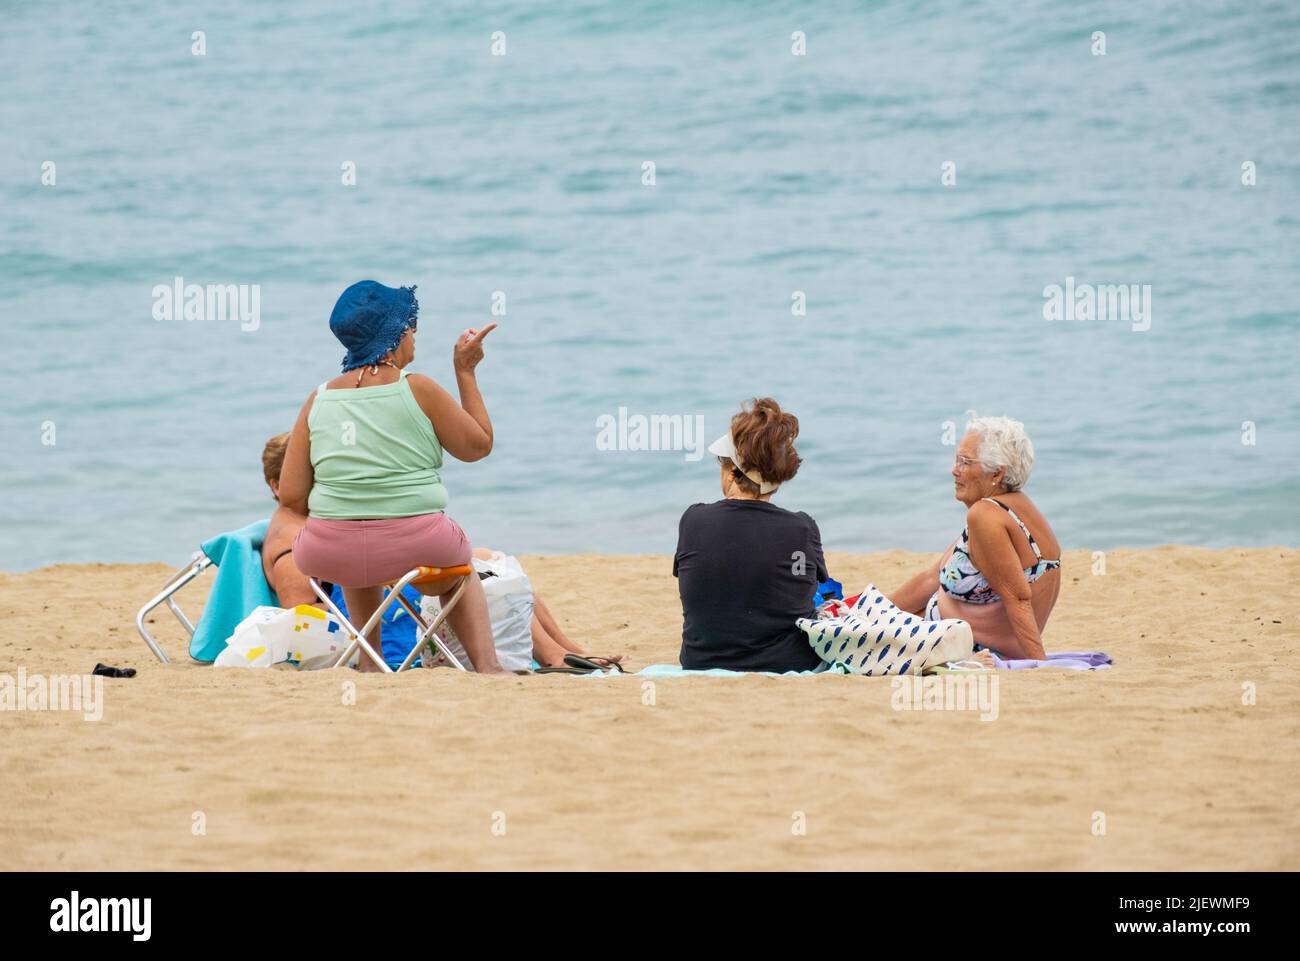 Las Palmas, Gran Canaria, Canary Islands, Spain. 28th June, 2022. Tourists, many from the UK, bask on the city beach in Las Palmas on Gran Canaria. Credit: Alan Dawson/ Alamy Live News. Stock Photo